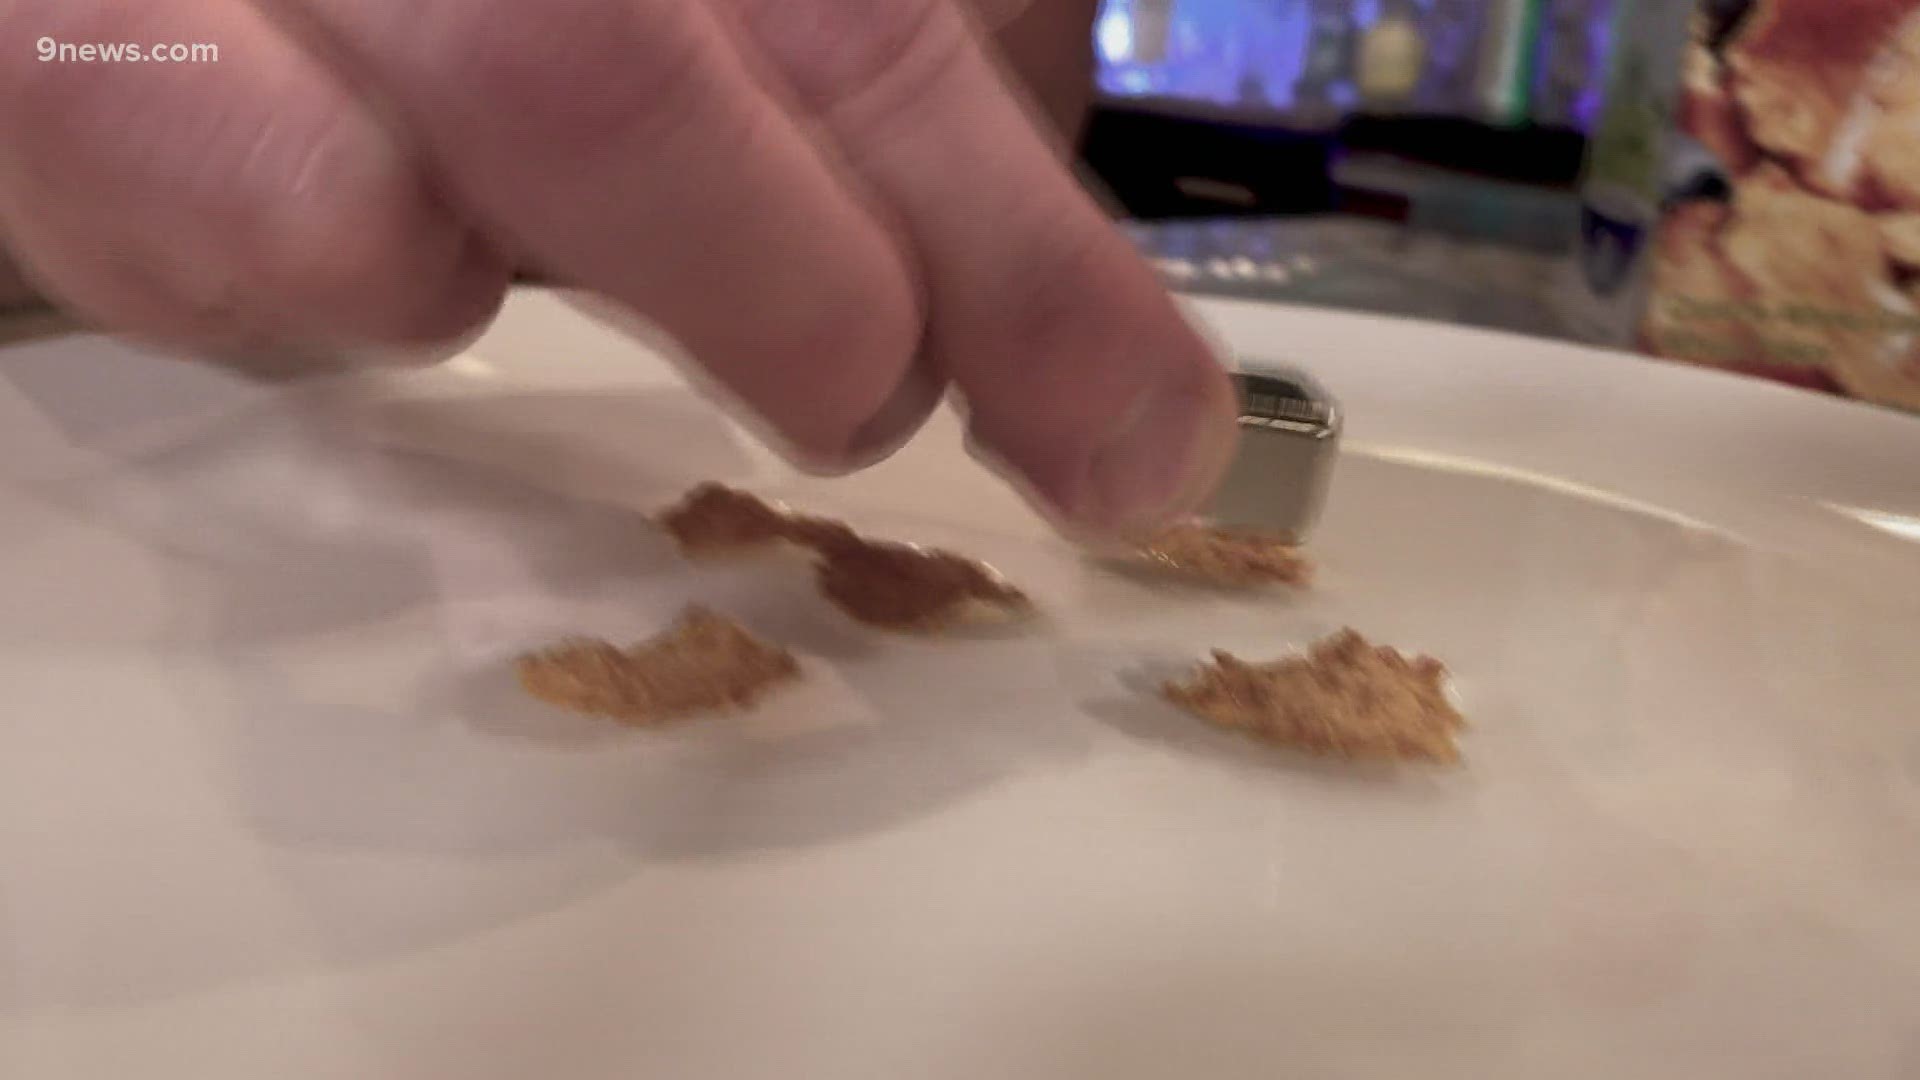 Steve Spangler suggests starting off the day with a bowl of cereal, and a really strong magnet.